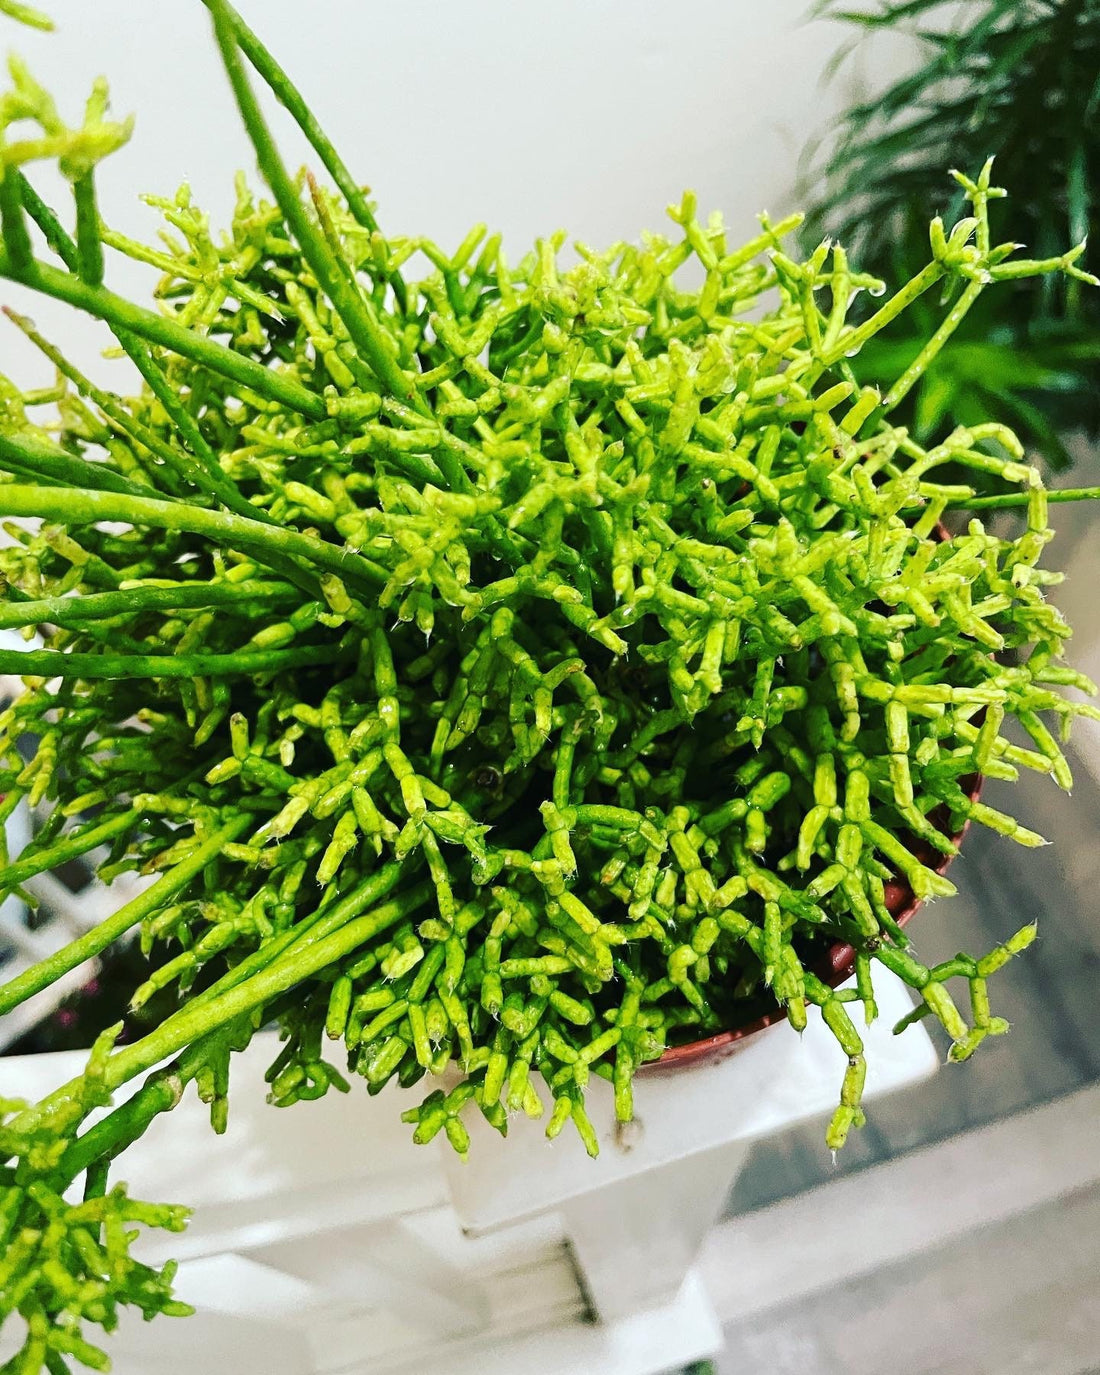 XL-6 inch potted - rhipsalis cereuscula -exotic rhipsalis -hard to find this size -exact plant as pictured